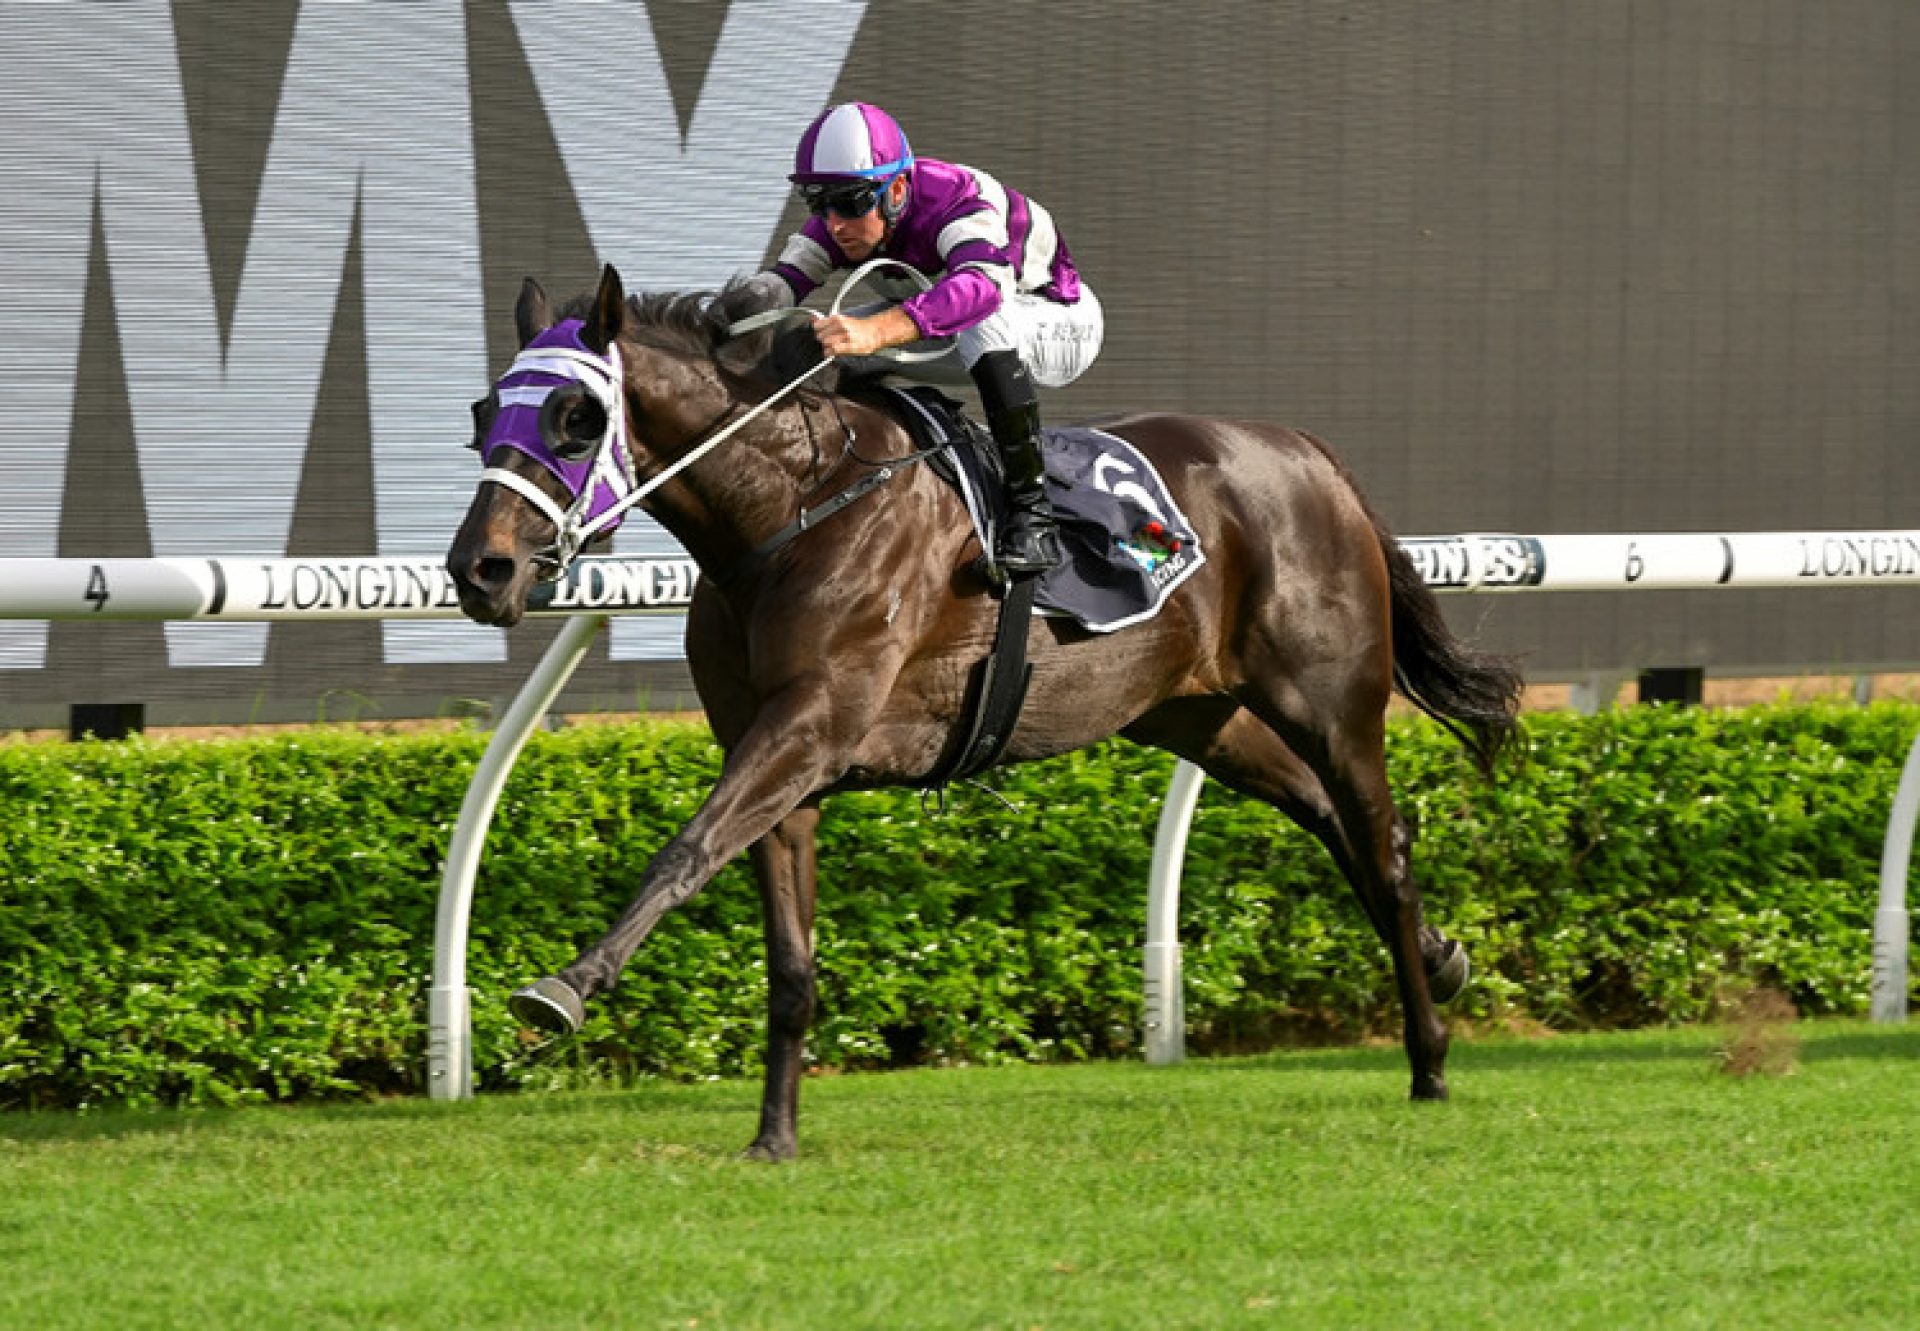 Easifar (Pride Of Dubai) winning the Listed Princess Stakes at Doomben